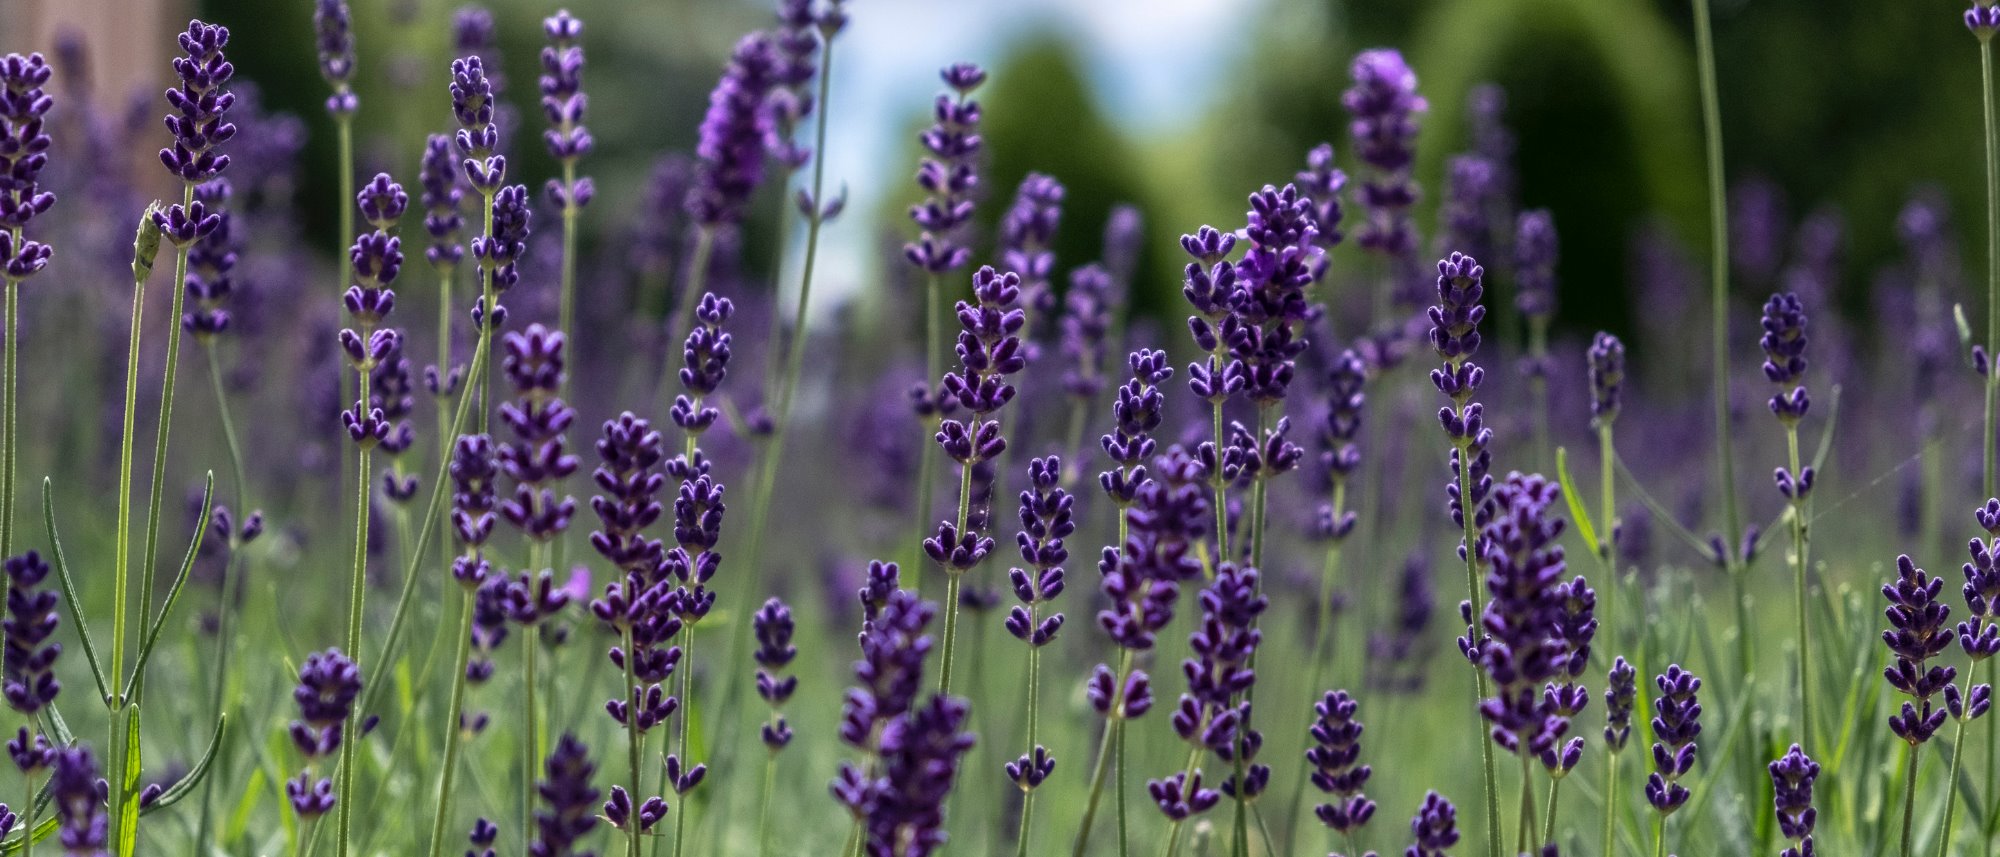 Grow lavender and it will come back each year